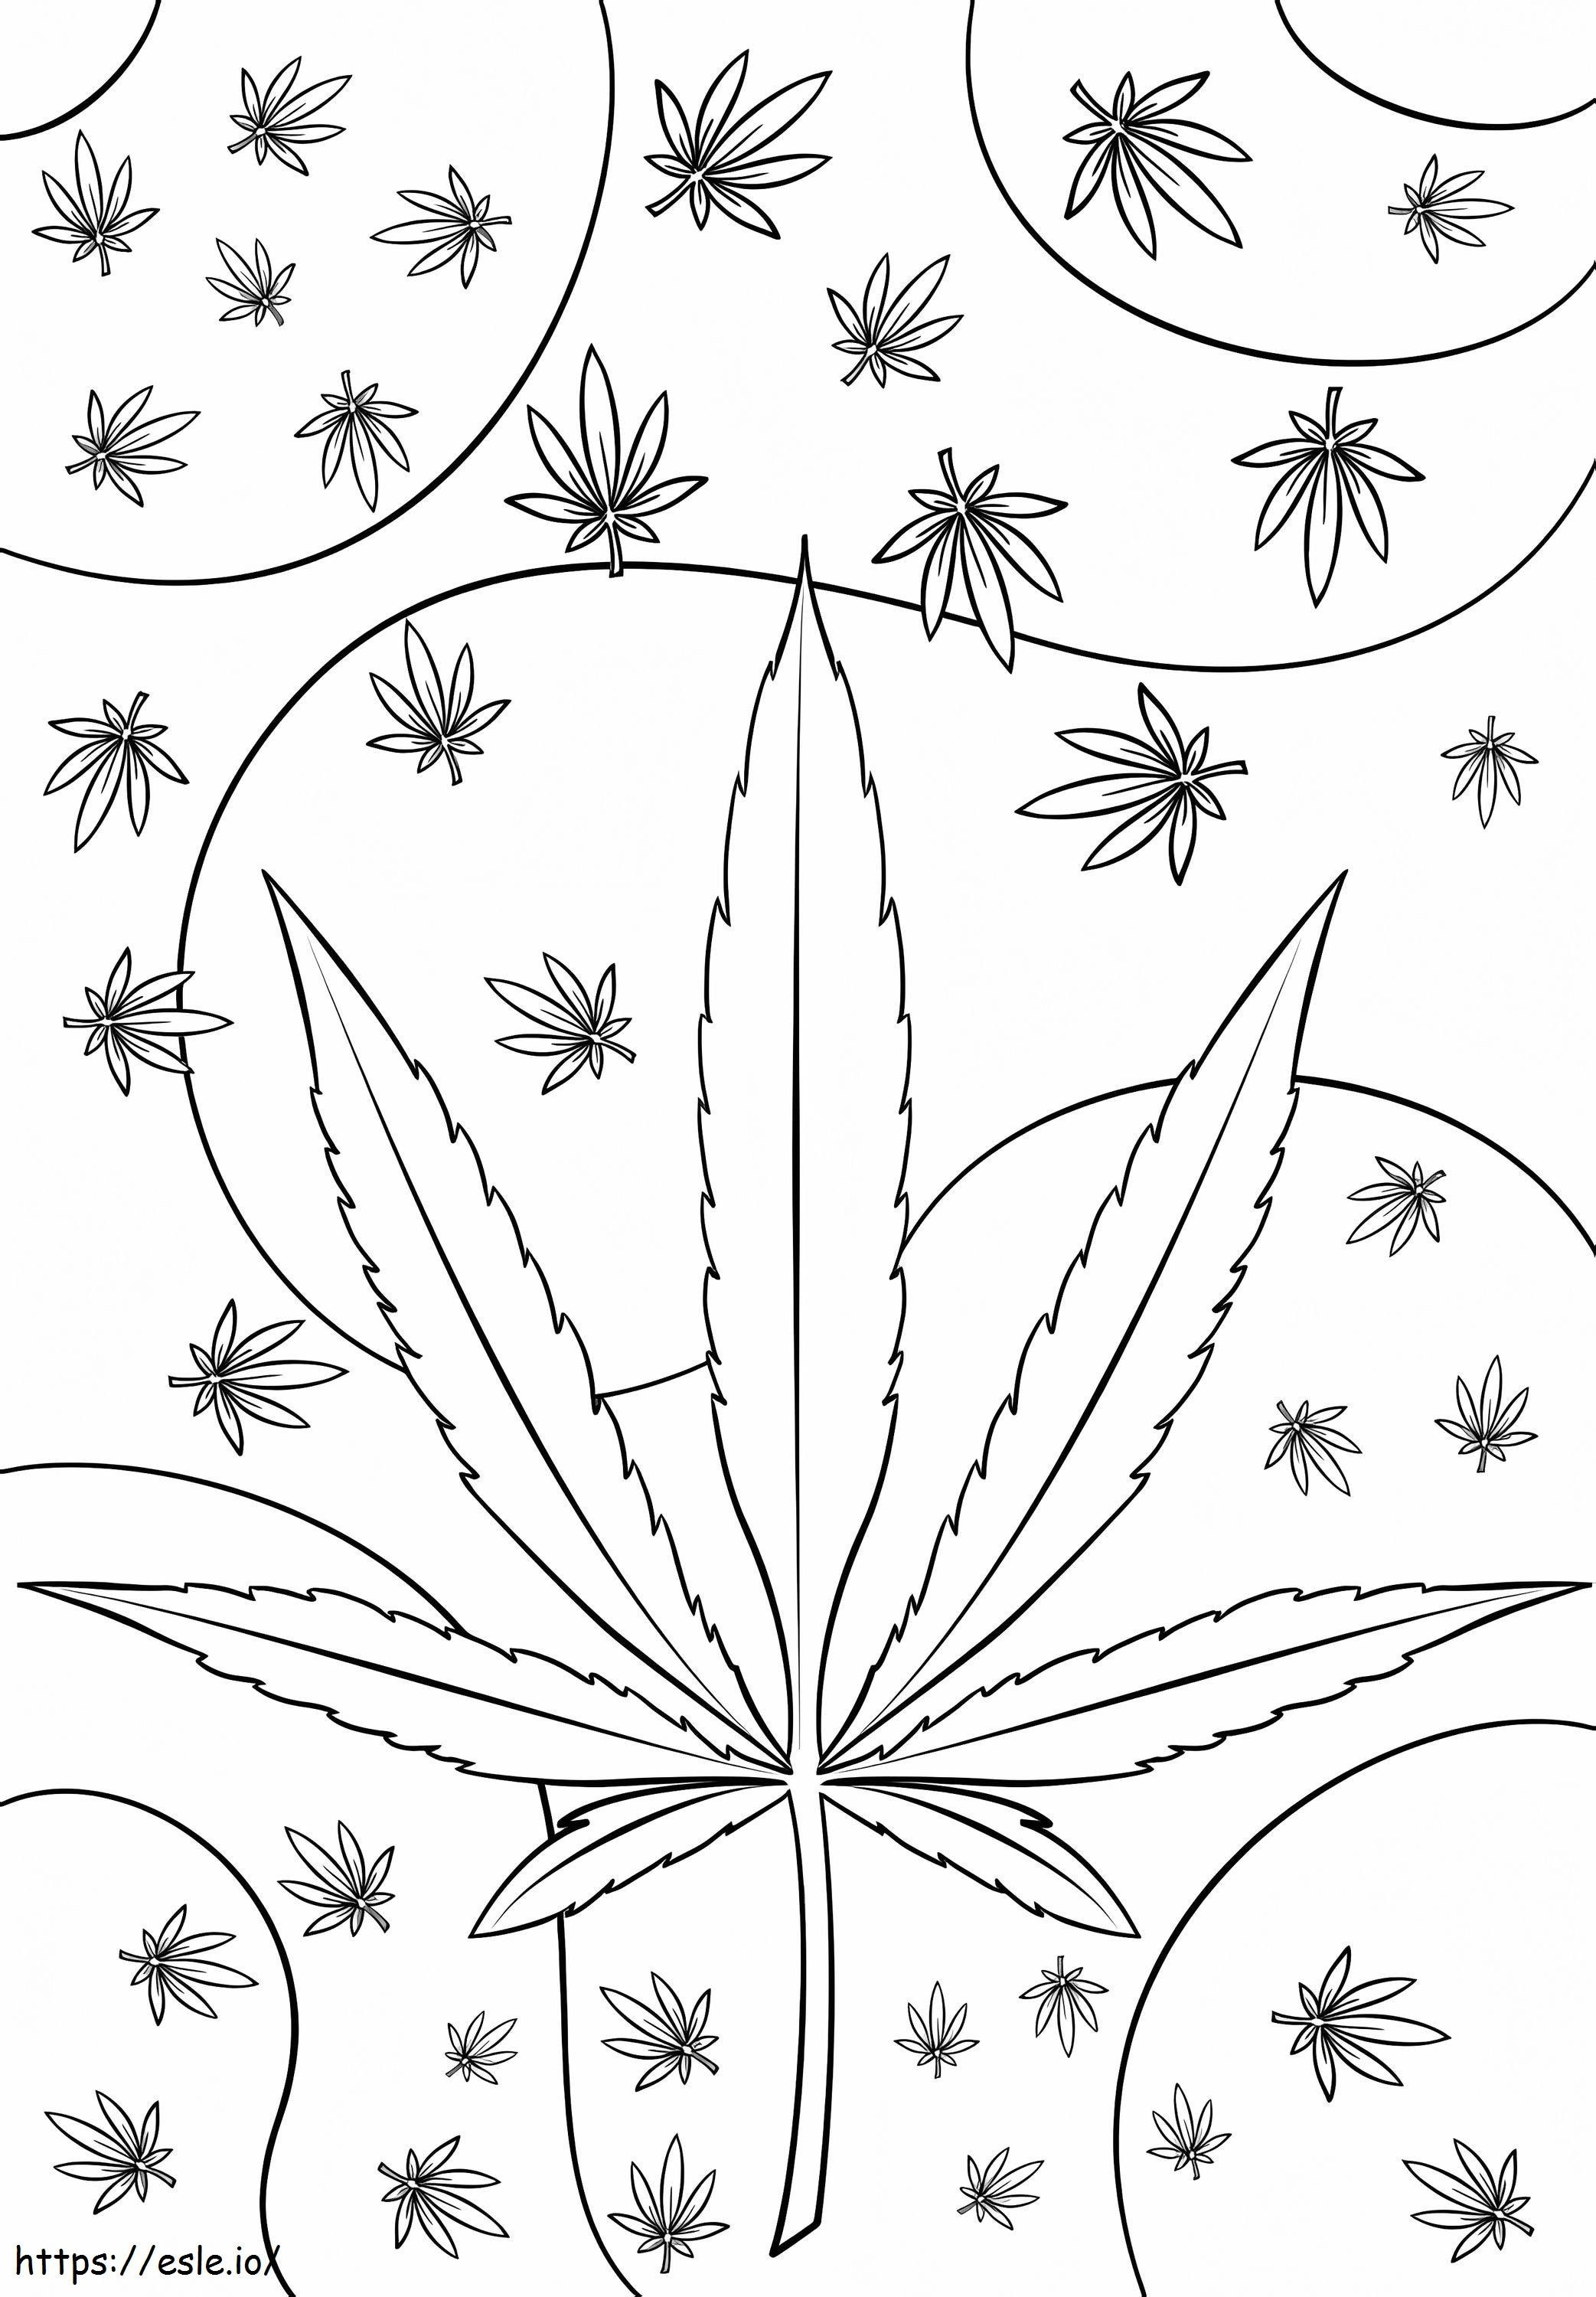 Psychedelic Weed coloring page